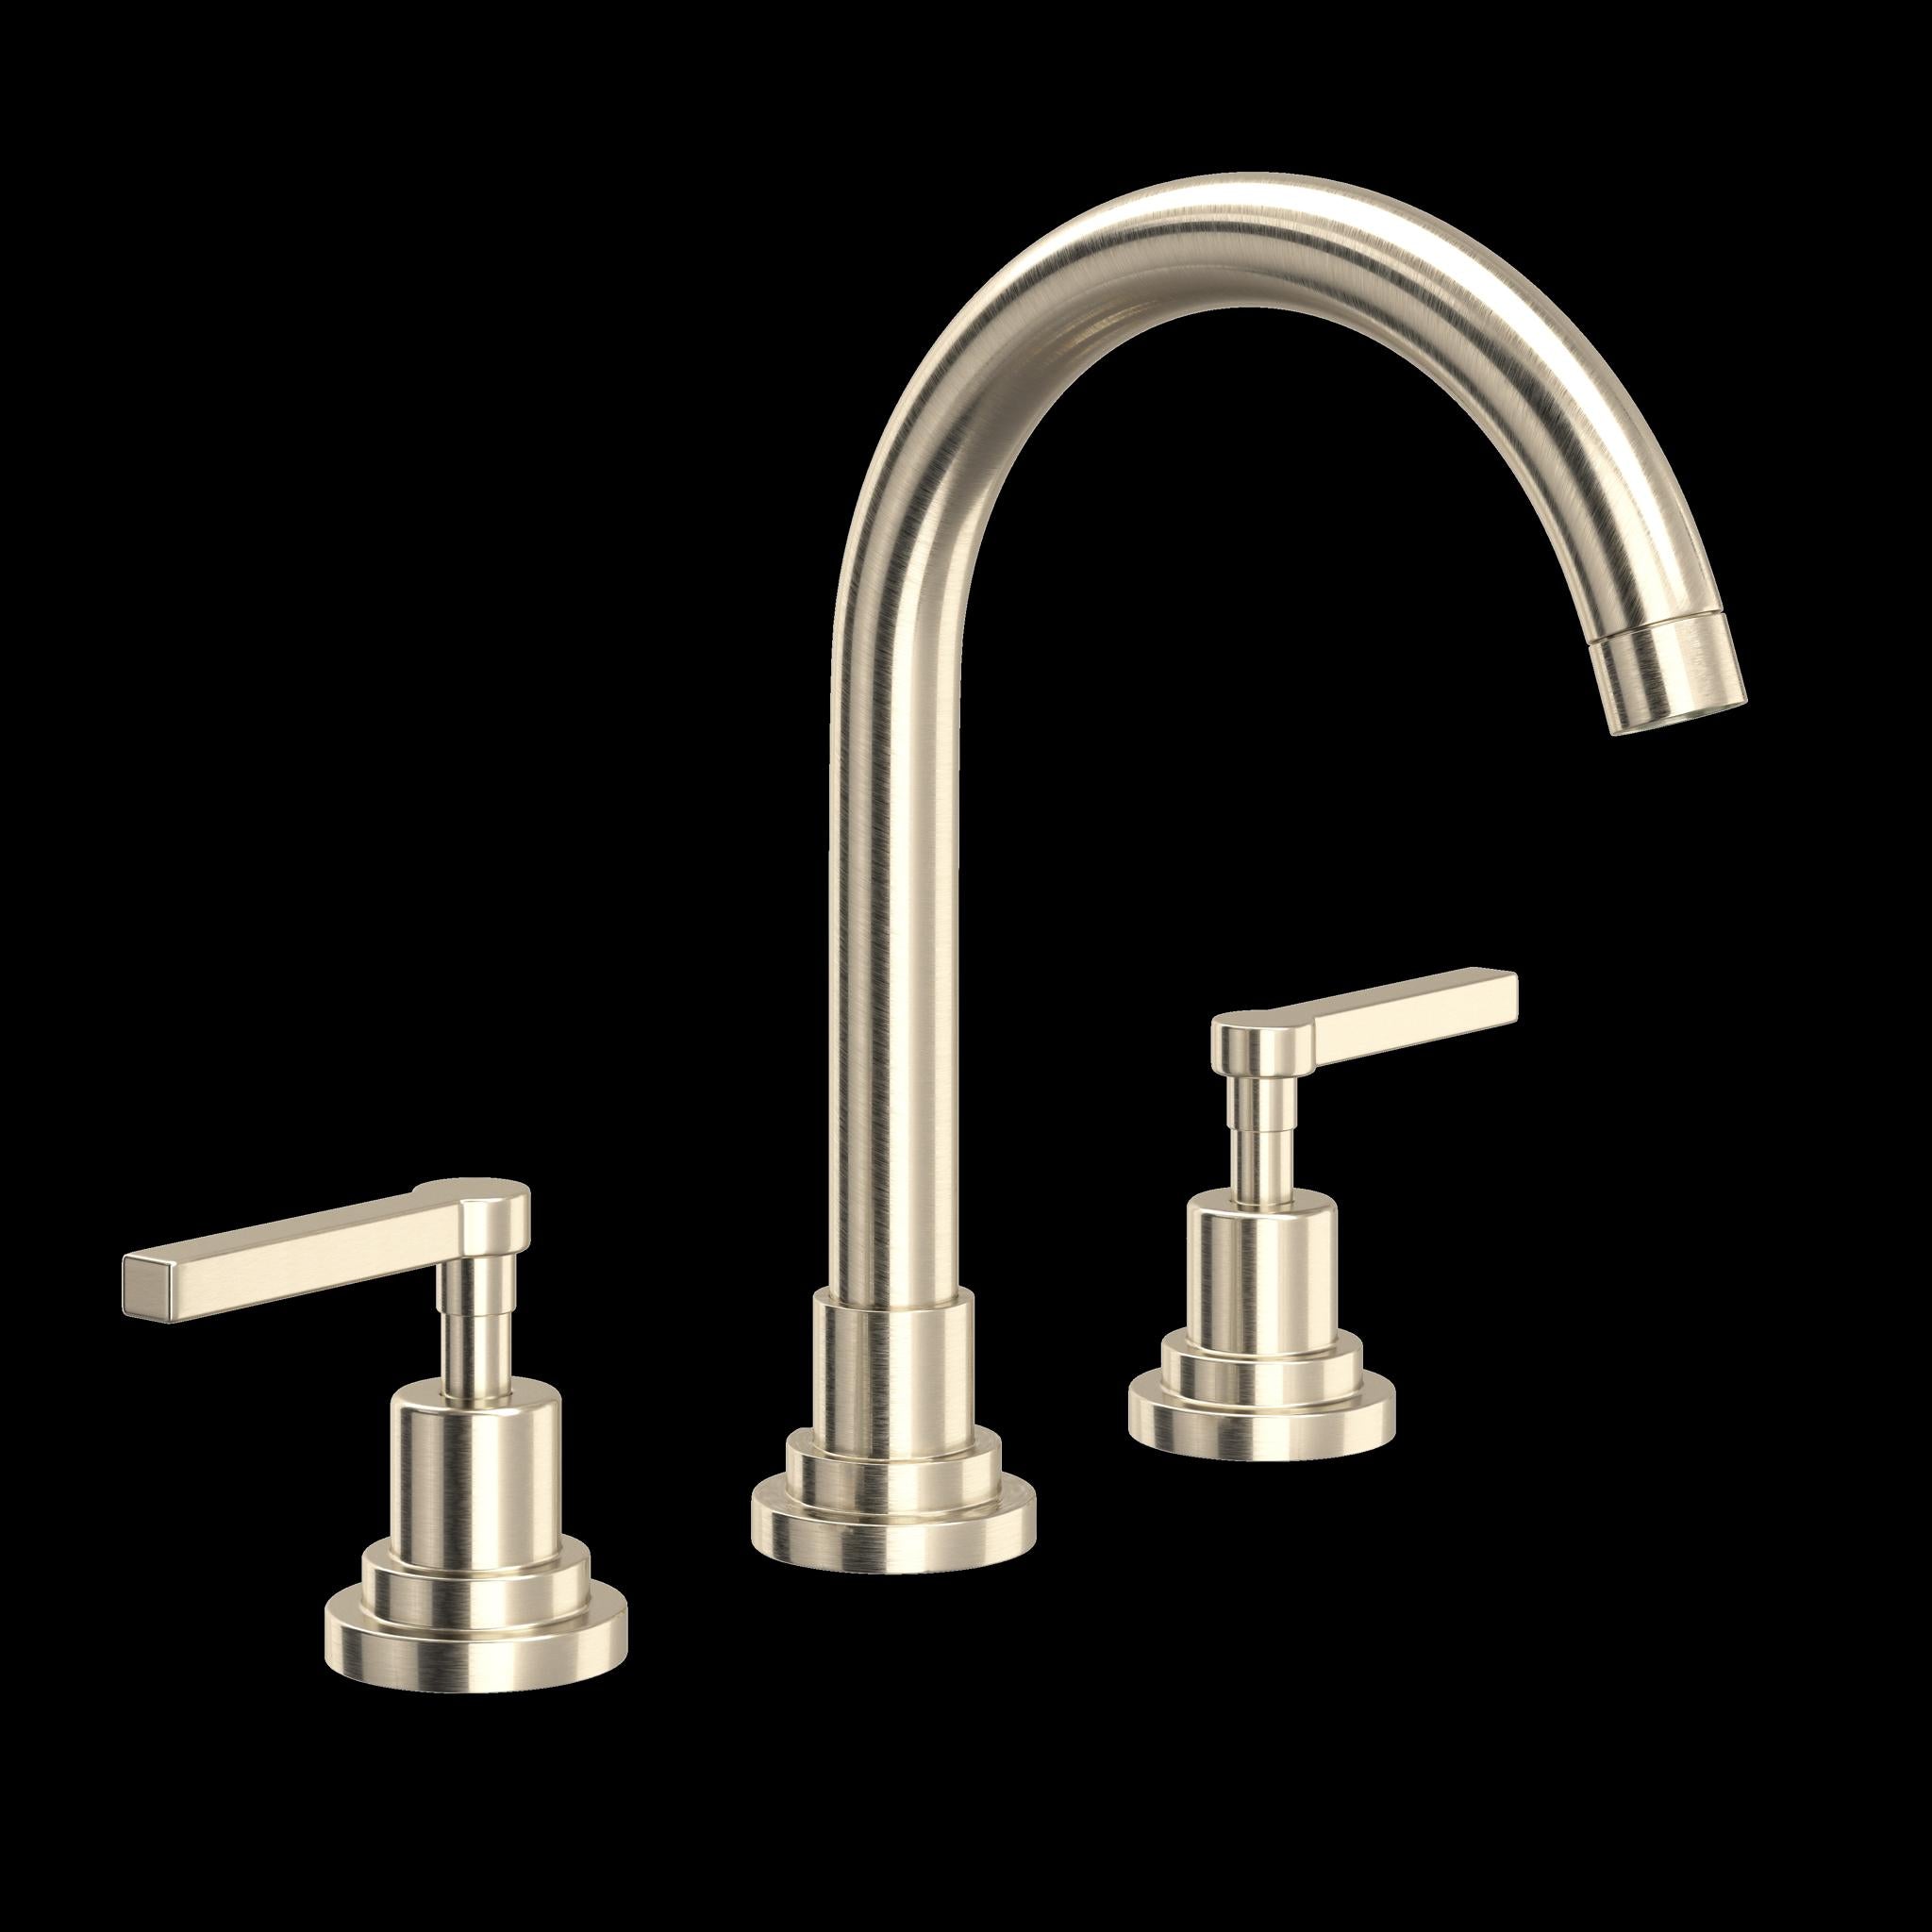 ROHL A2208 Lombardia Widespread Lavatory Faucet With C-Spout